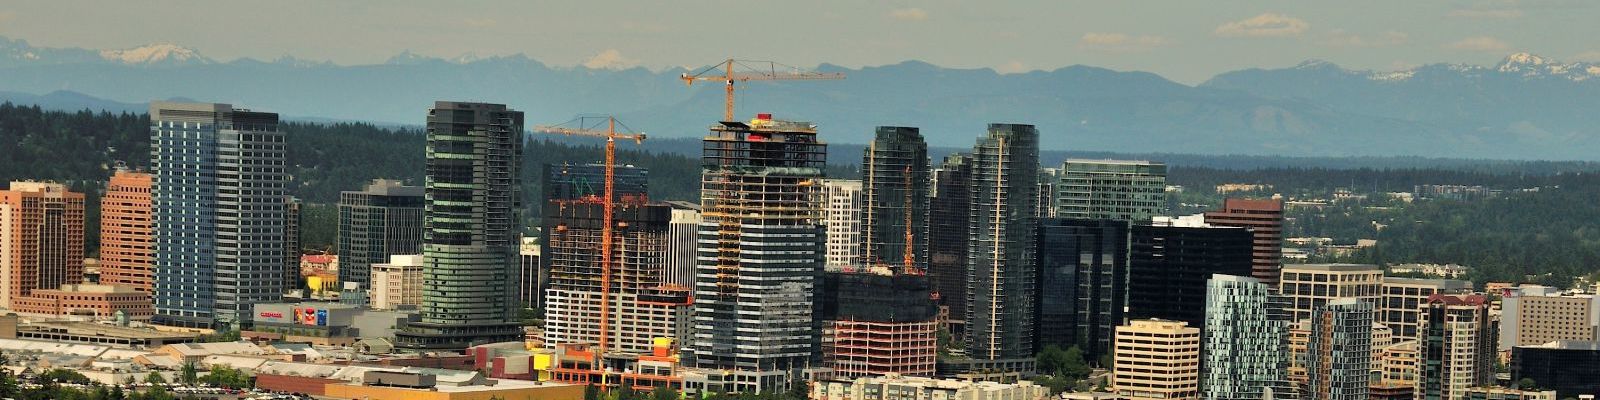 Image of downtown Bellevue skyline with tall buildings